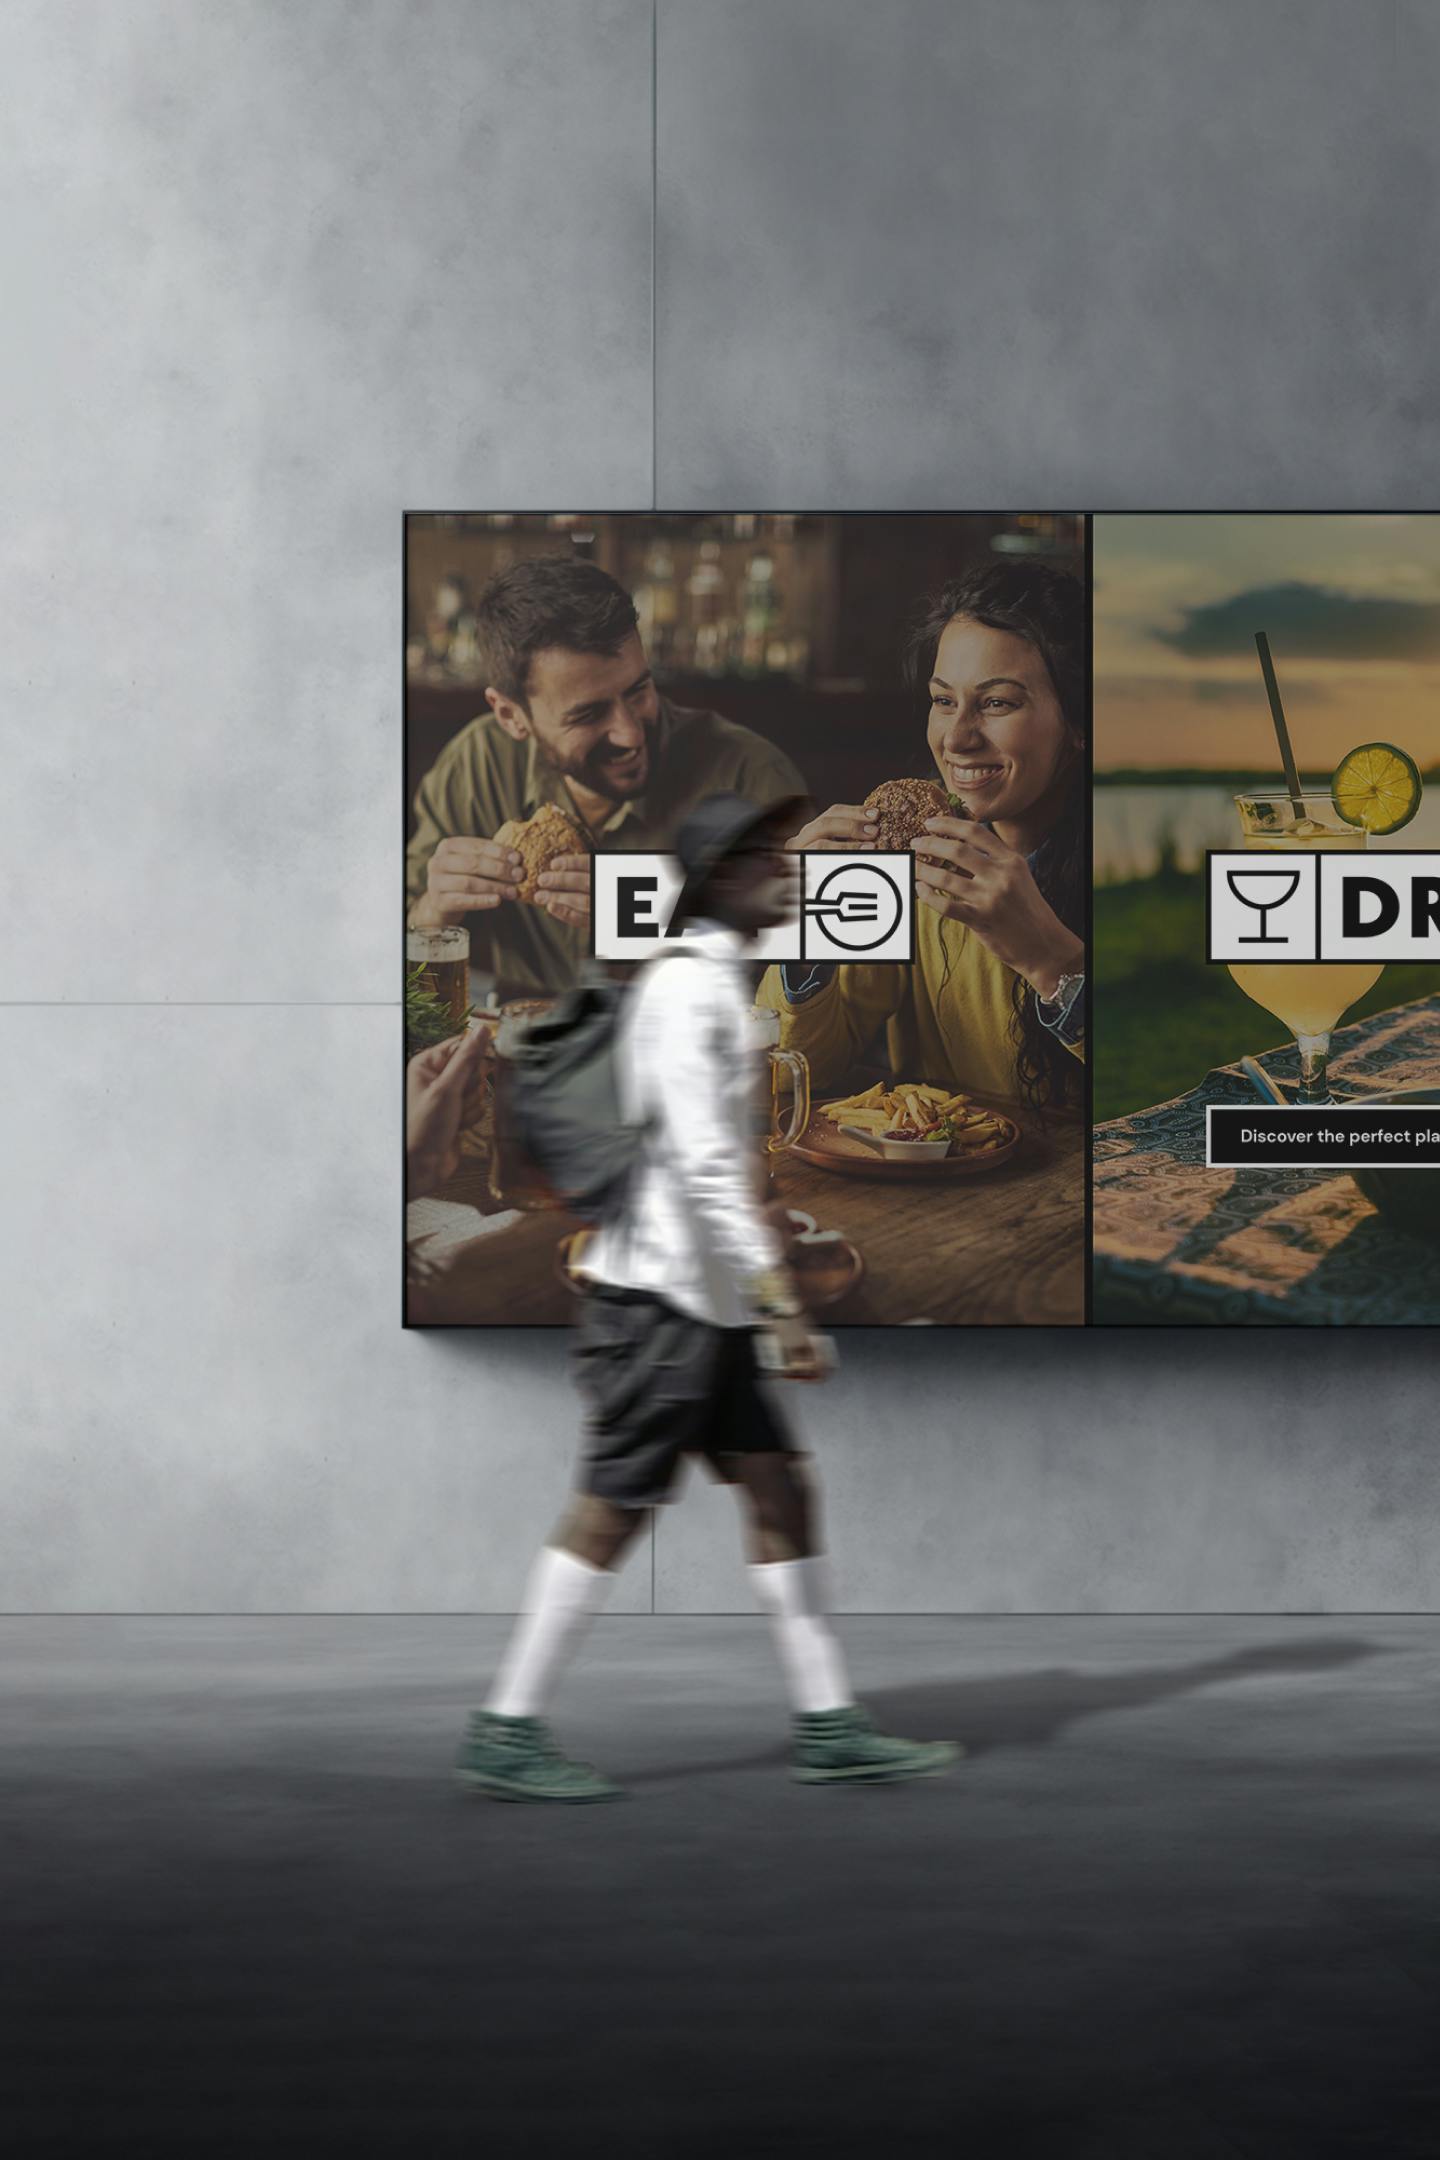 Image of a man walking past a billboard with a poster of Eat Drink Meet inside